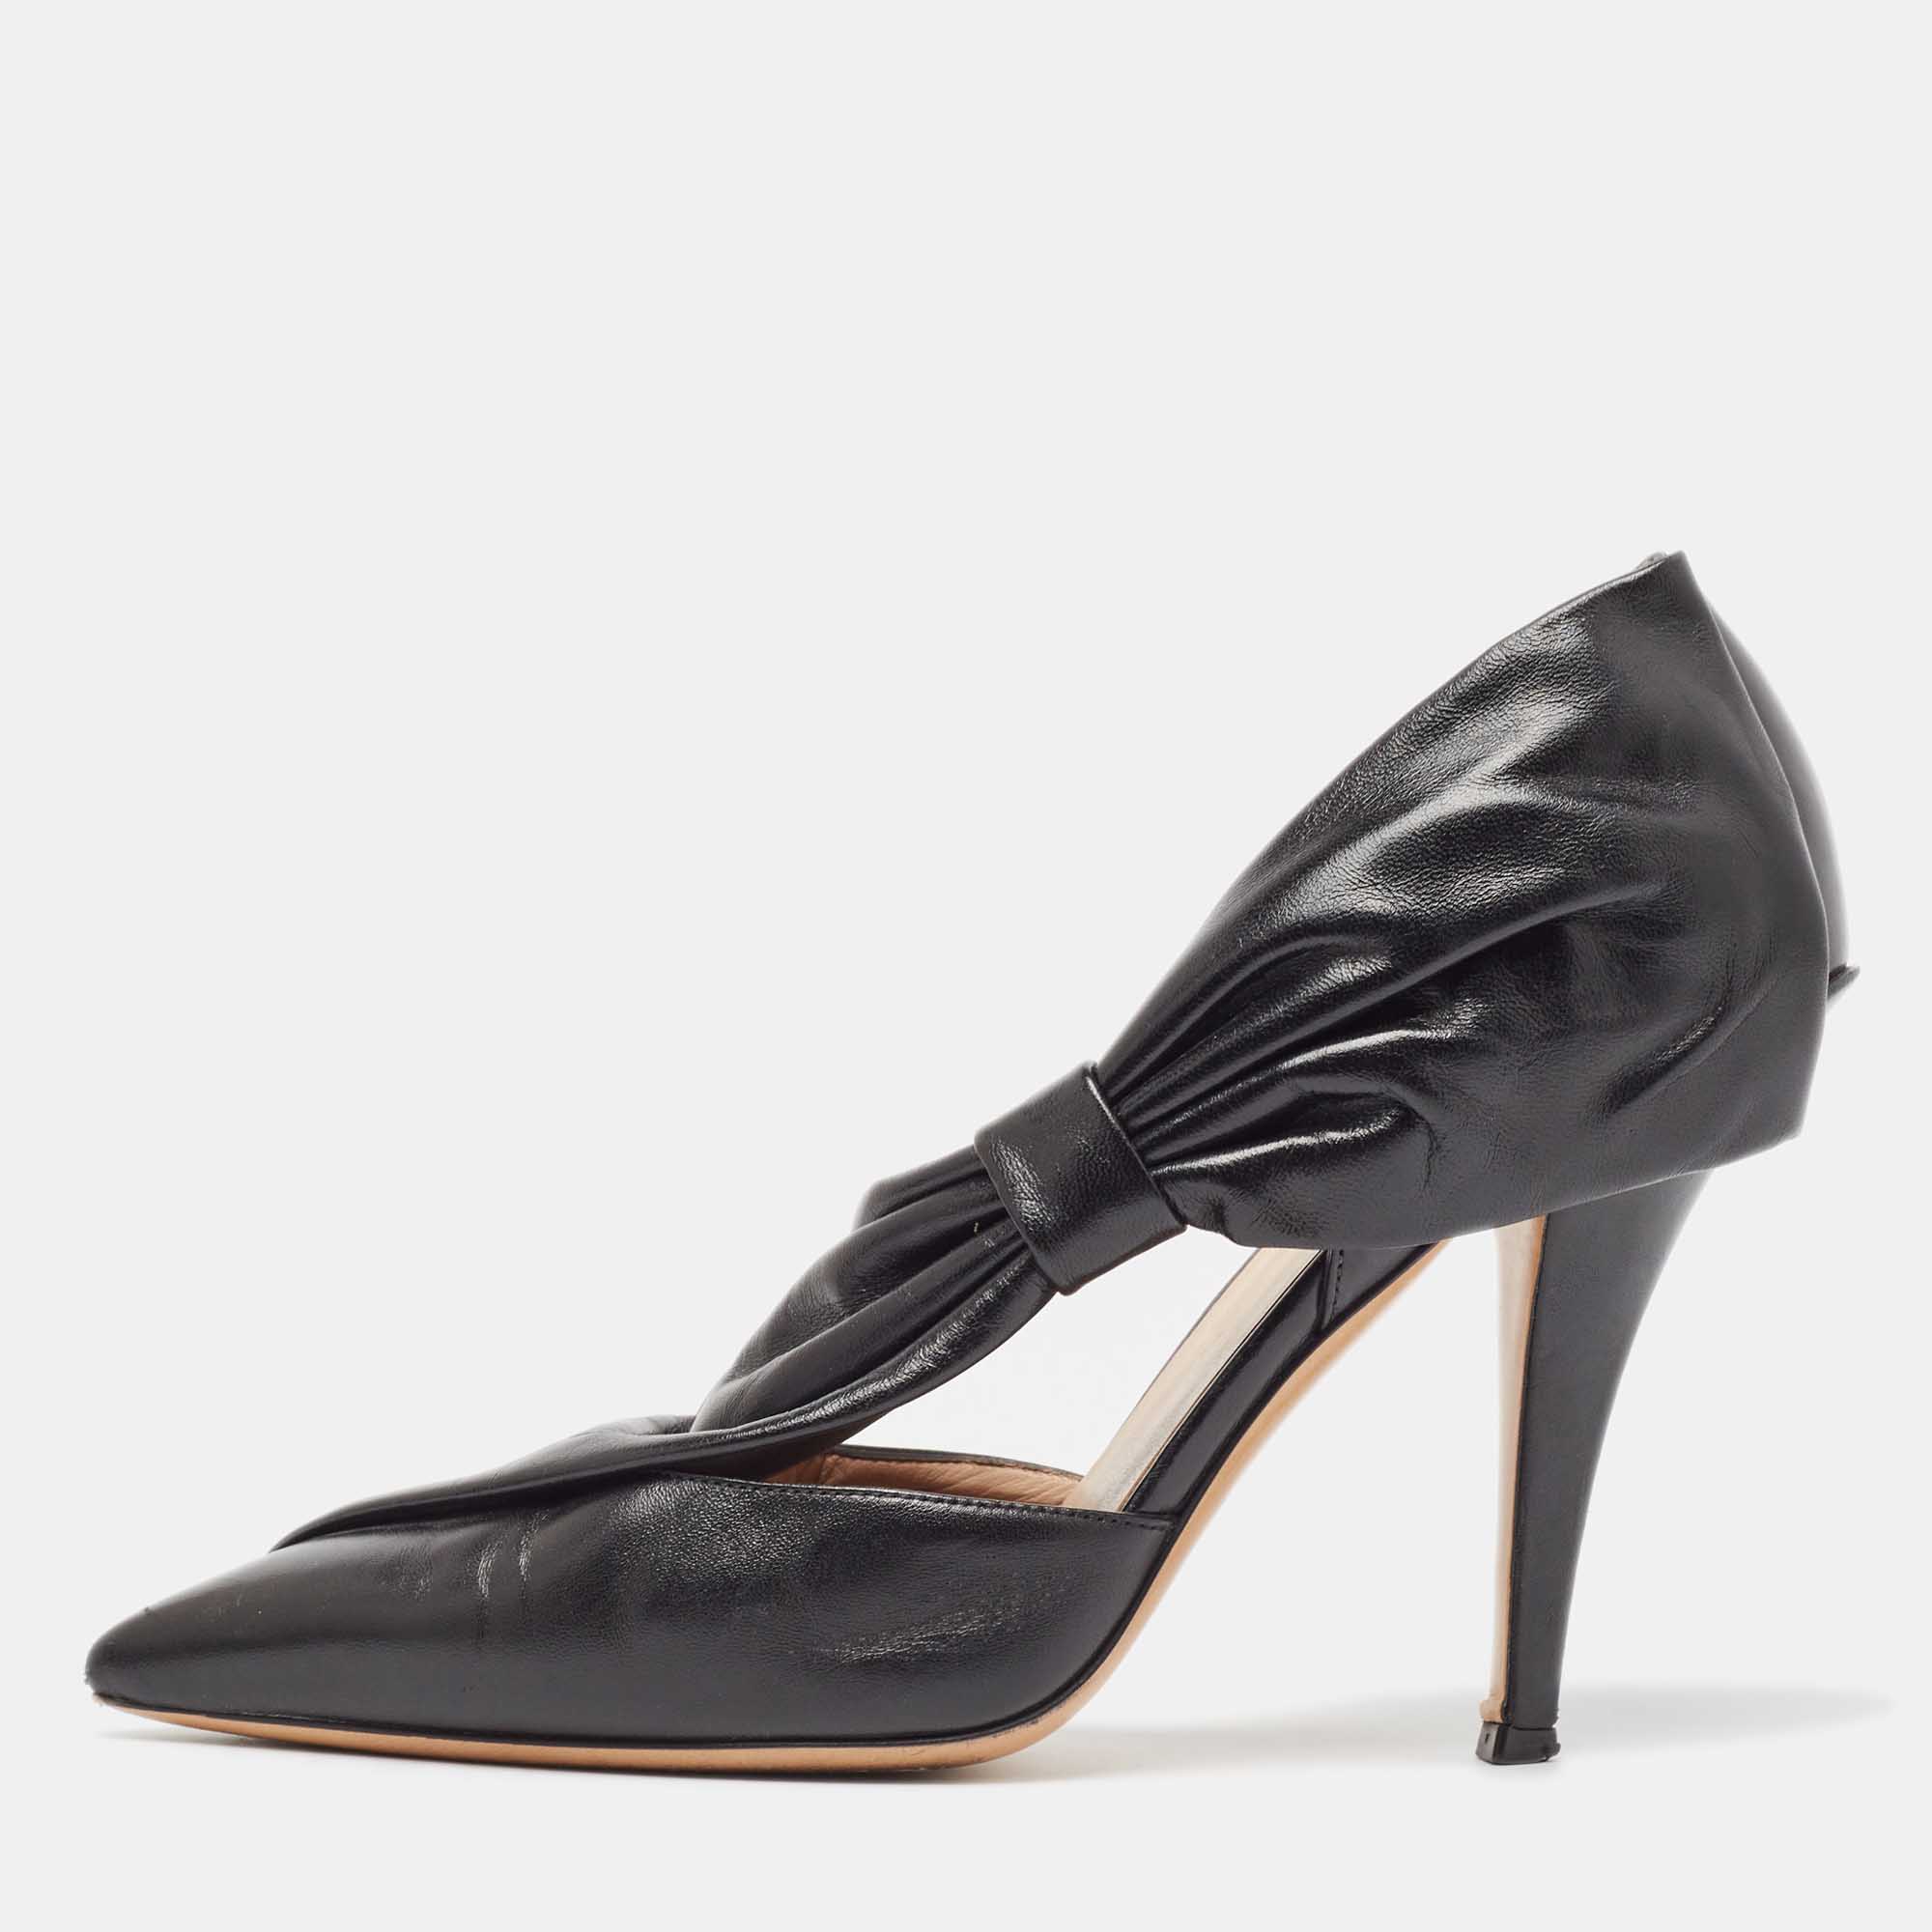 Pre-owned Valentino Garavani Black Leather Bow Pointed Toe Pumps Size 39.5